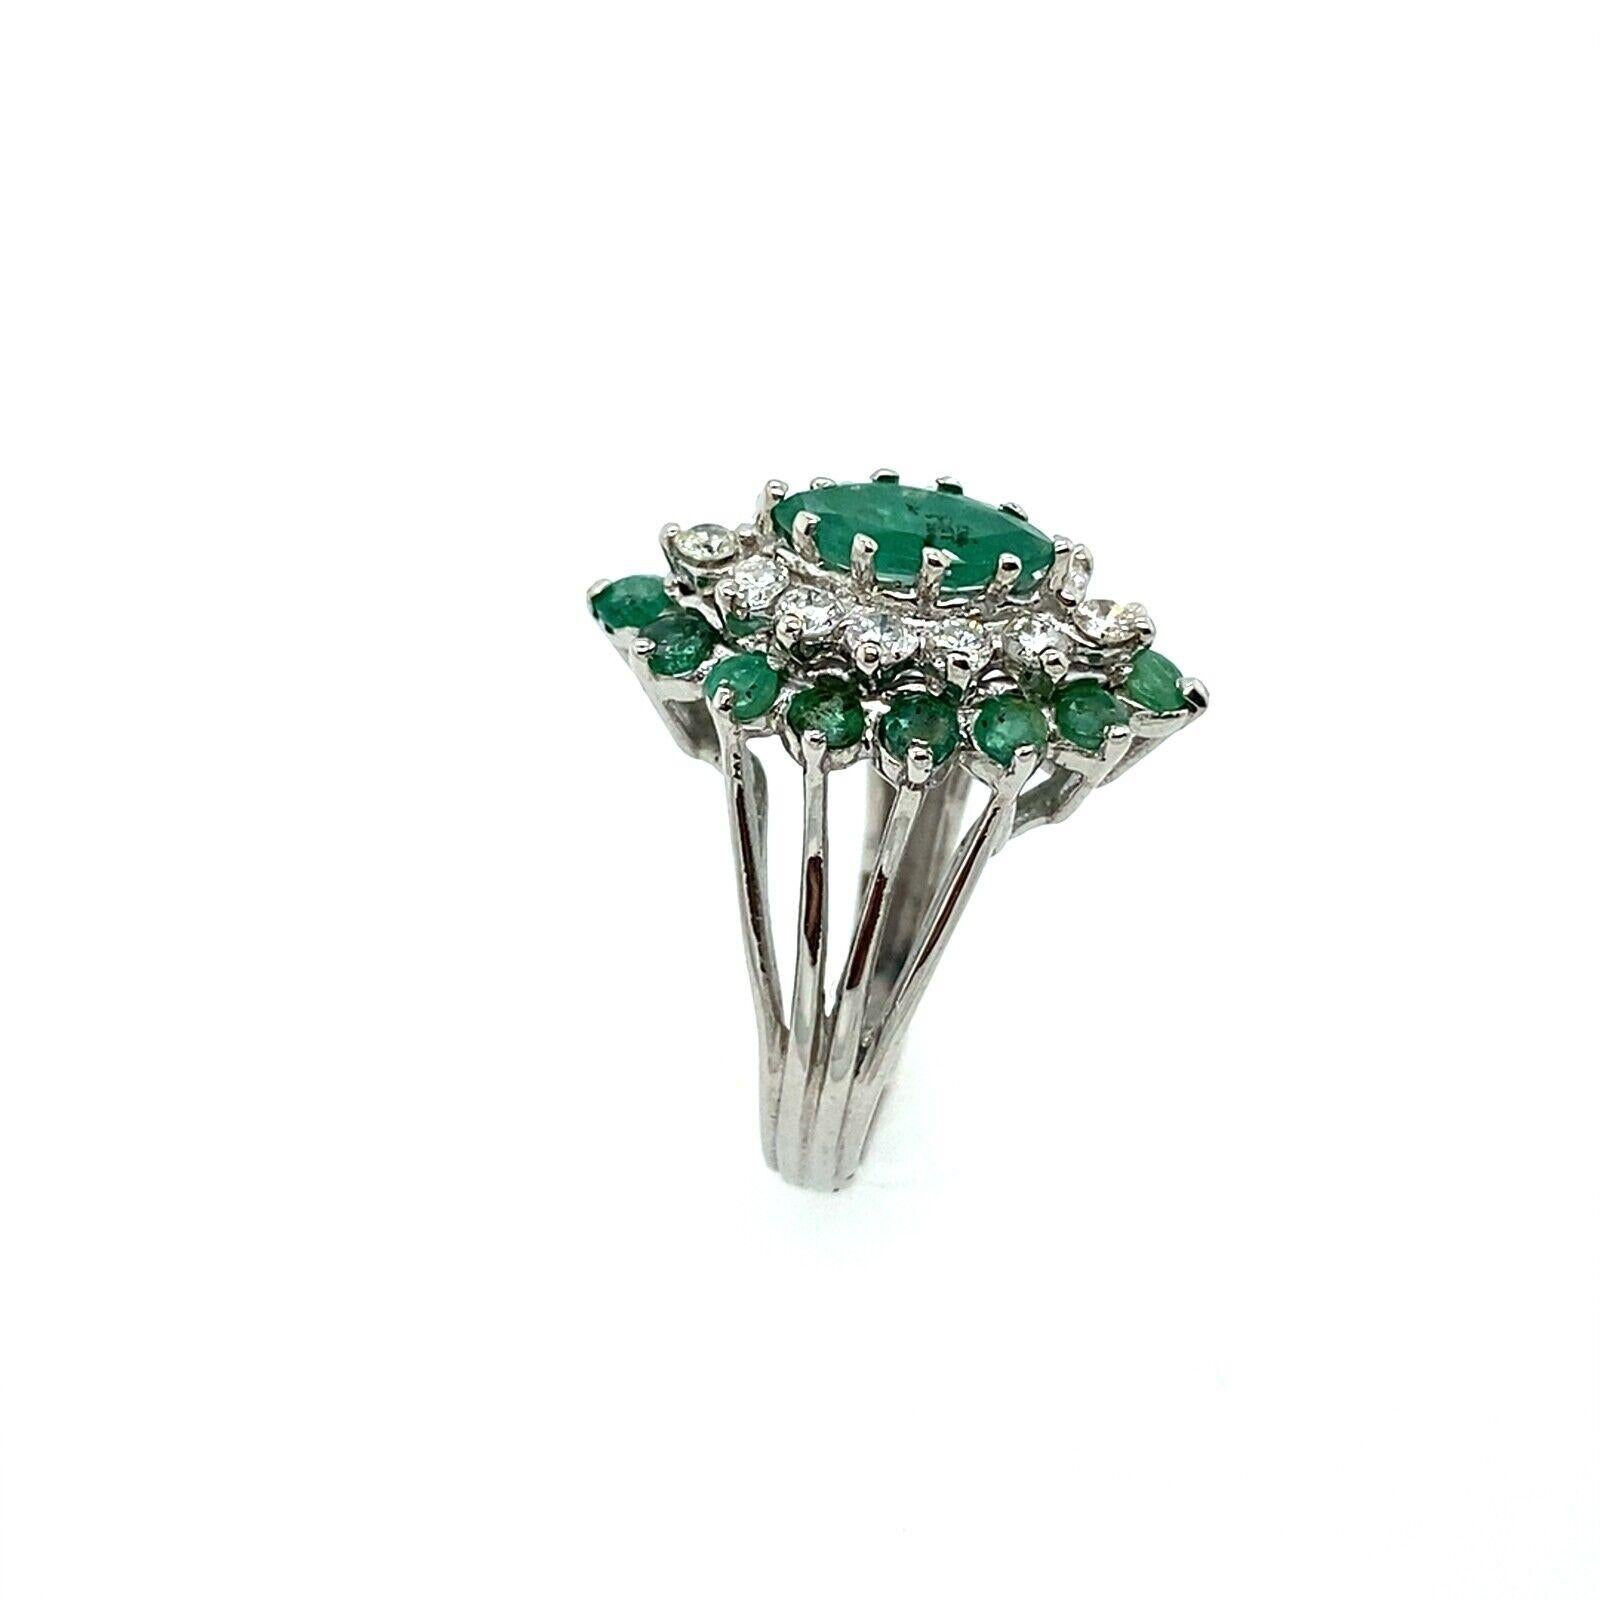 The ring features a cluster of marquise cut emeralds, with 0.75ct of round brilliant cut diamonds and 15 matching marquise shape emeralds, set in 14ct white gold. The ring is a perfect complement to any ensemble and can be worn on any